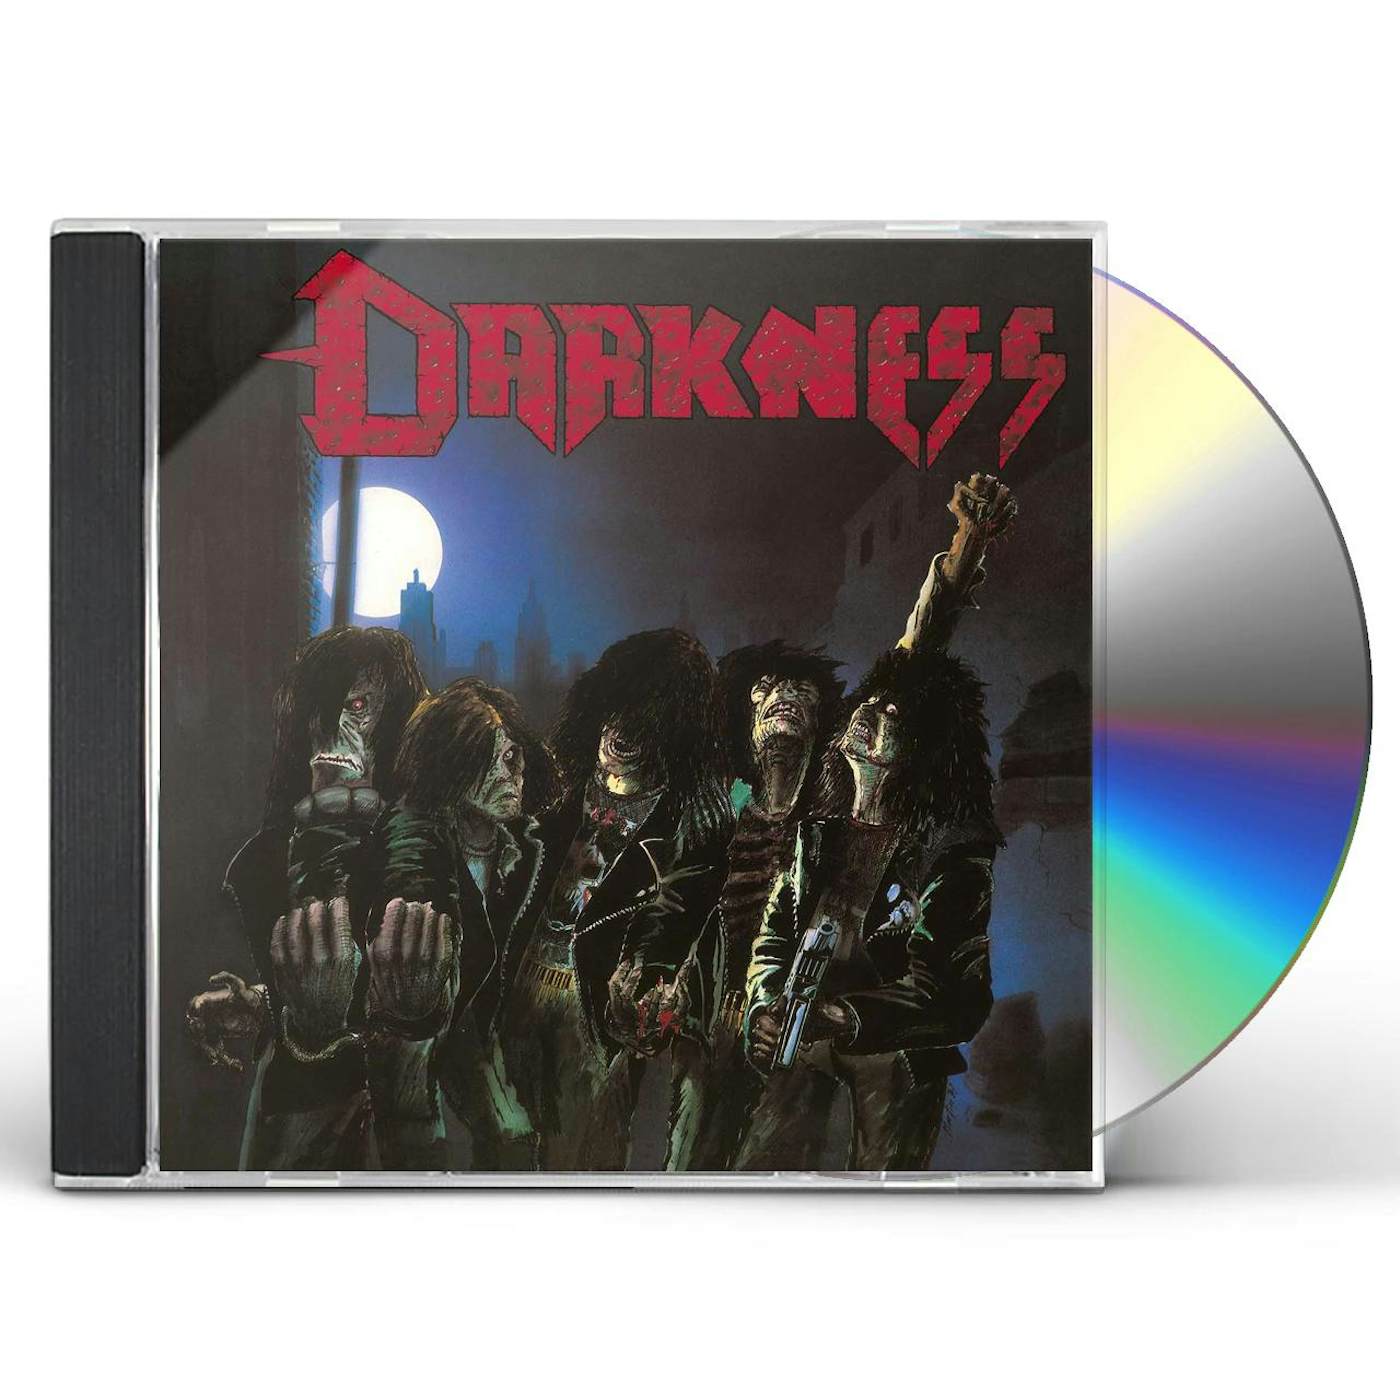 The Darkness DEATH SQUAD CD